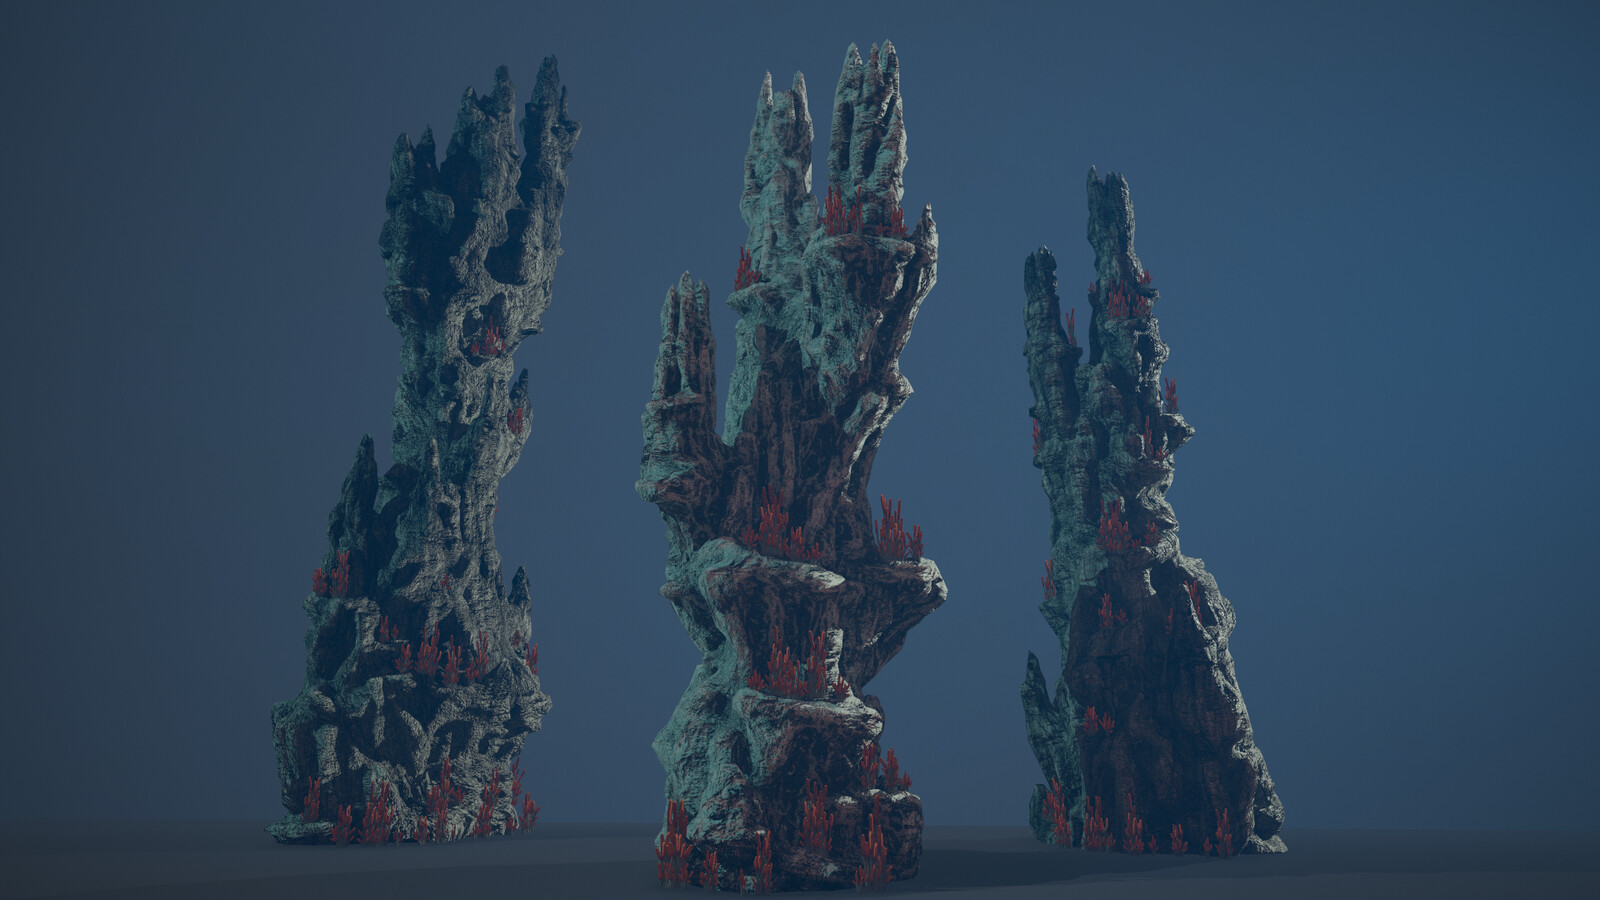 3D - UnAnnounced_Project : Hydrothermal vents / Tubeworms